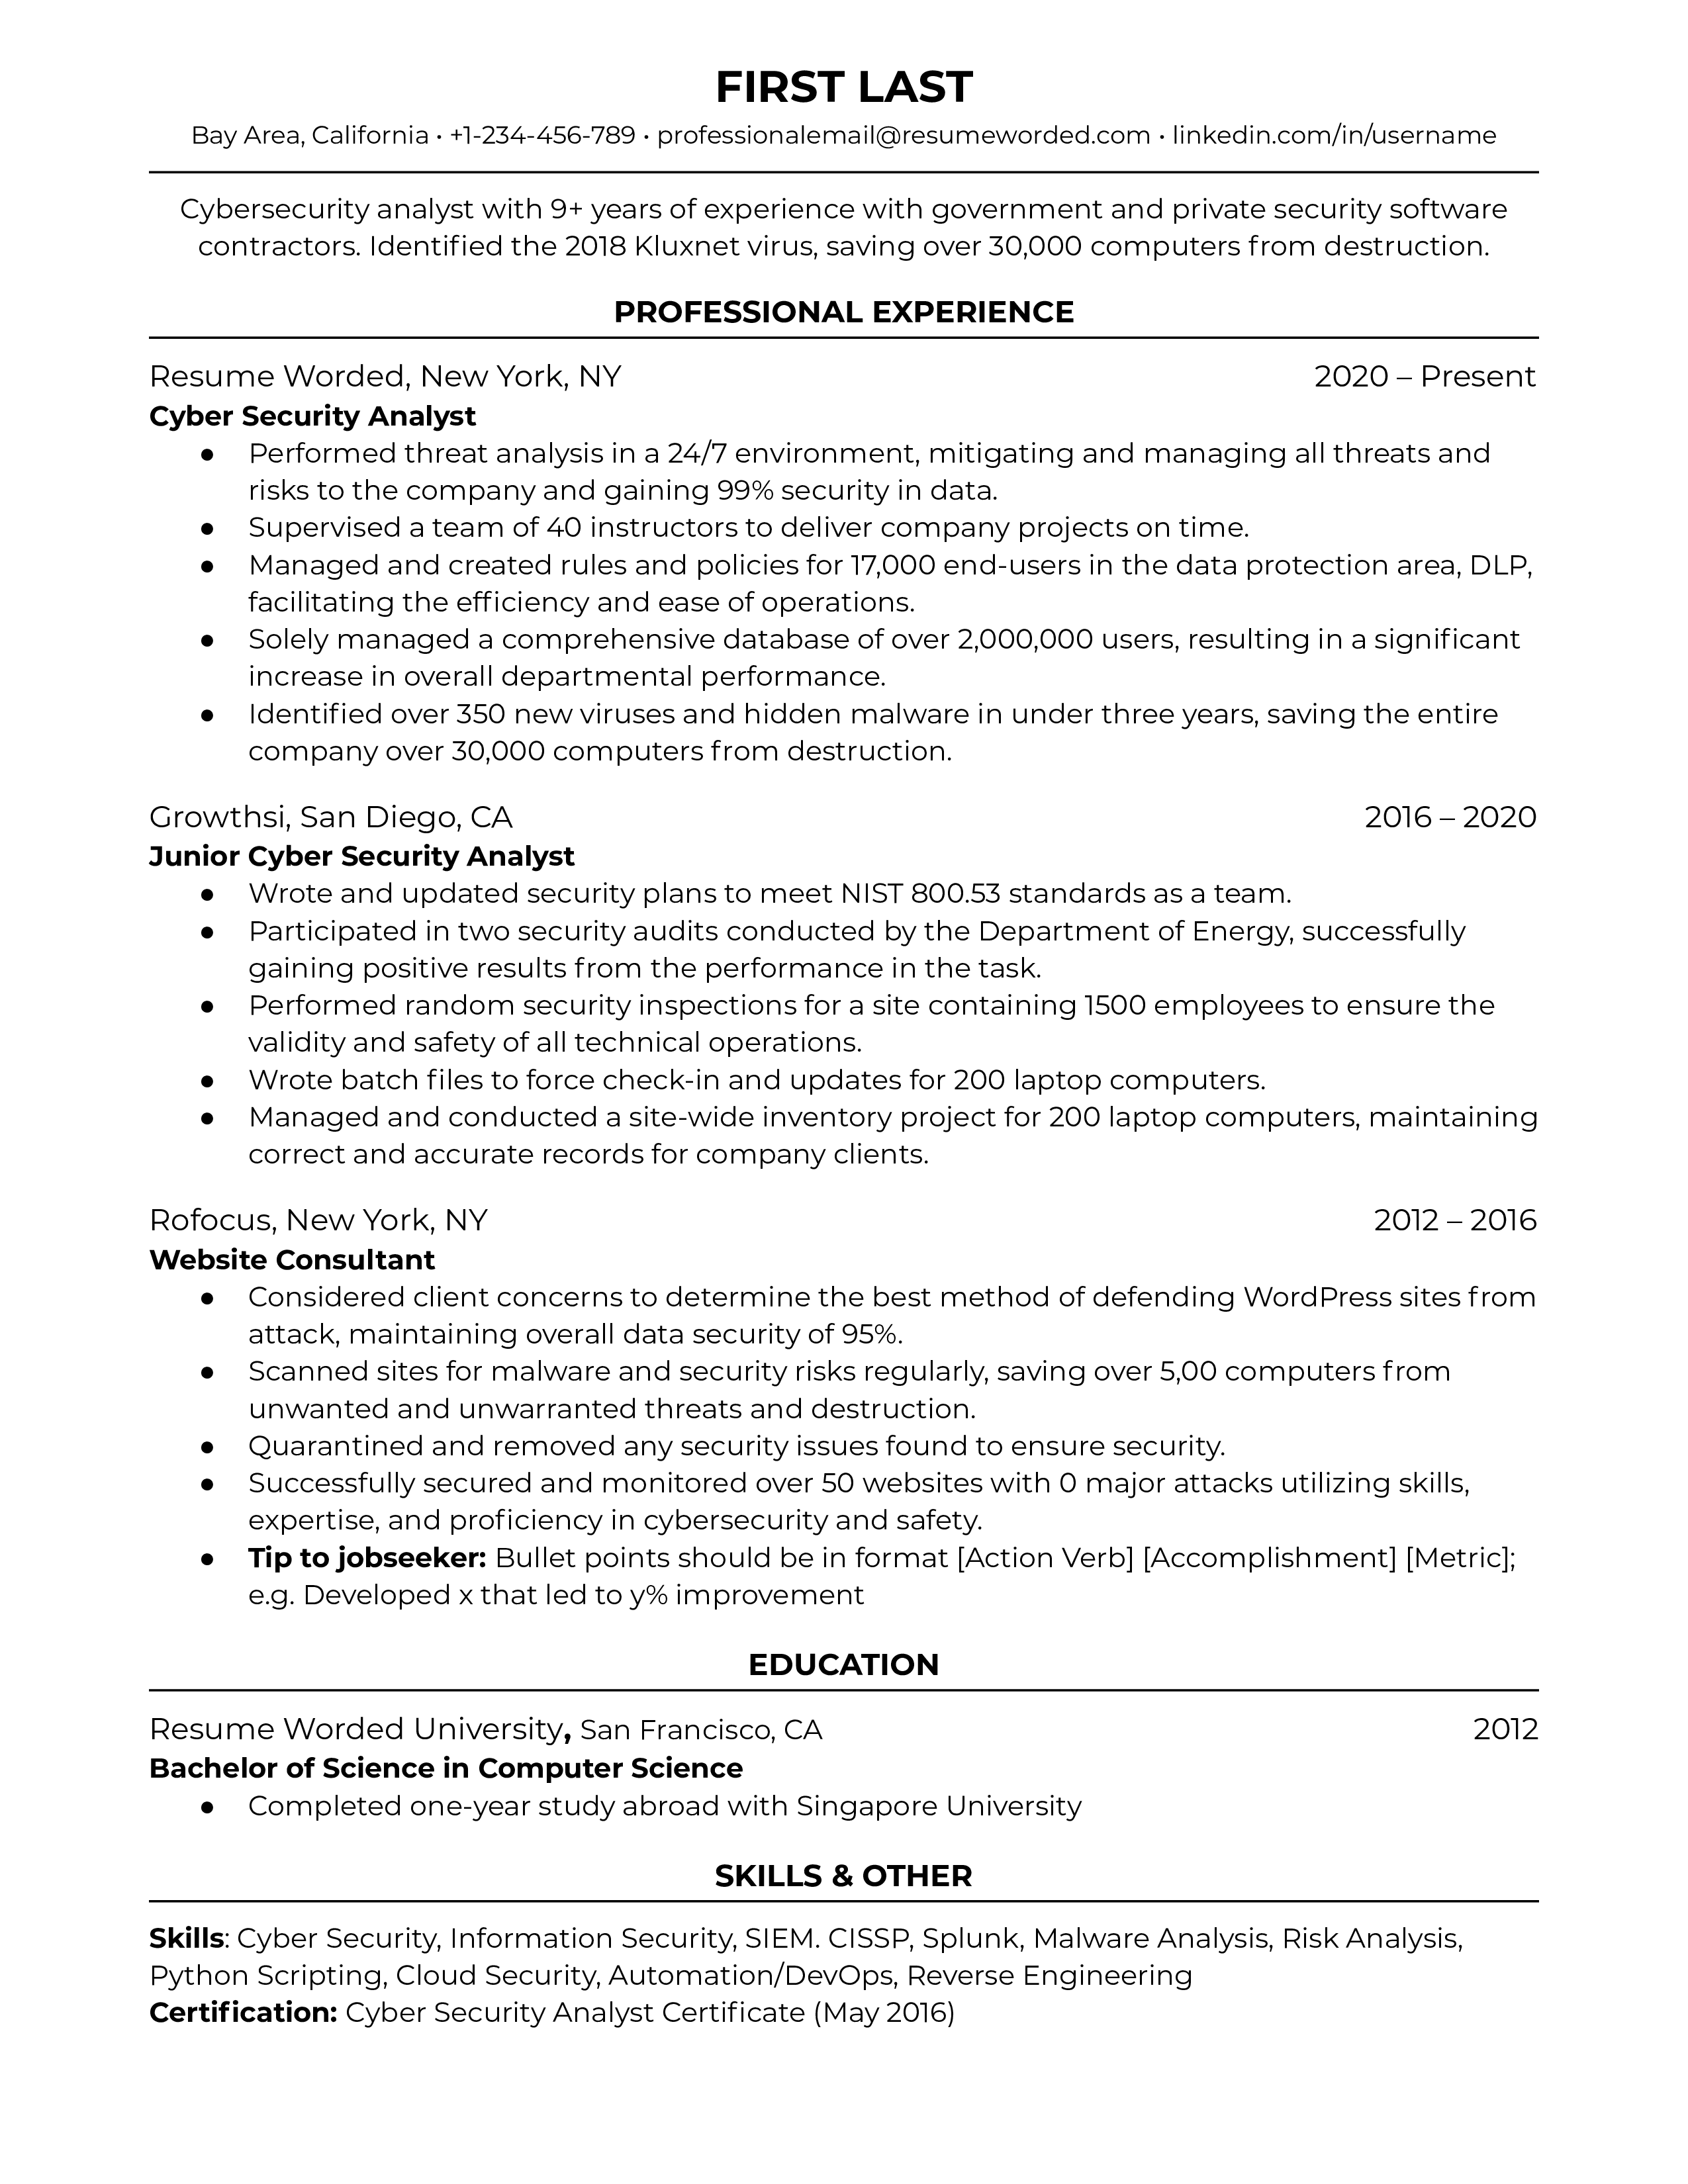 Cyber security resume which highlights core cyber experience